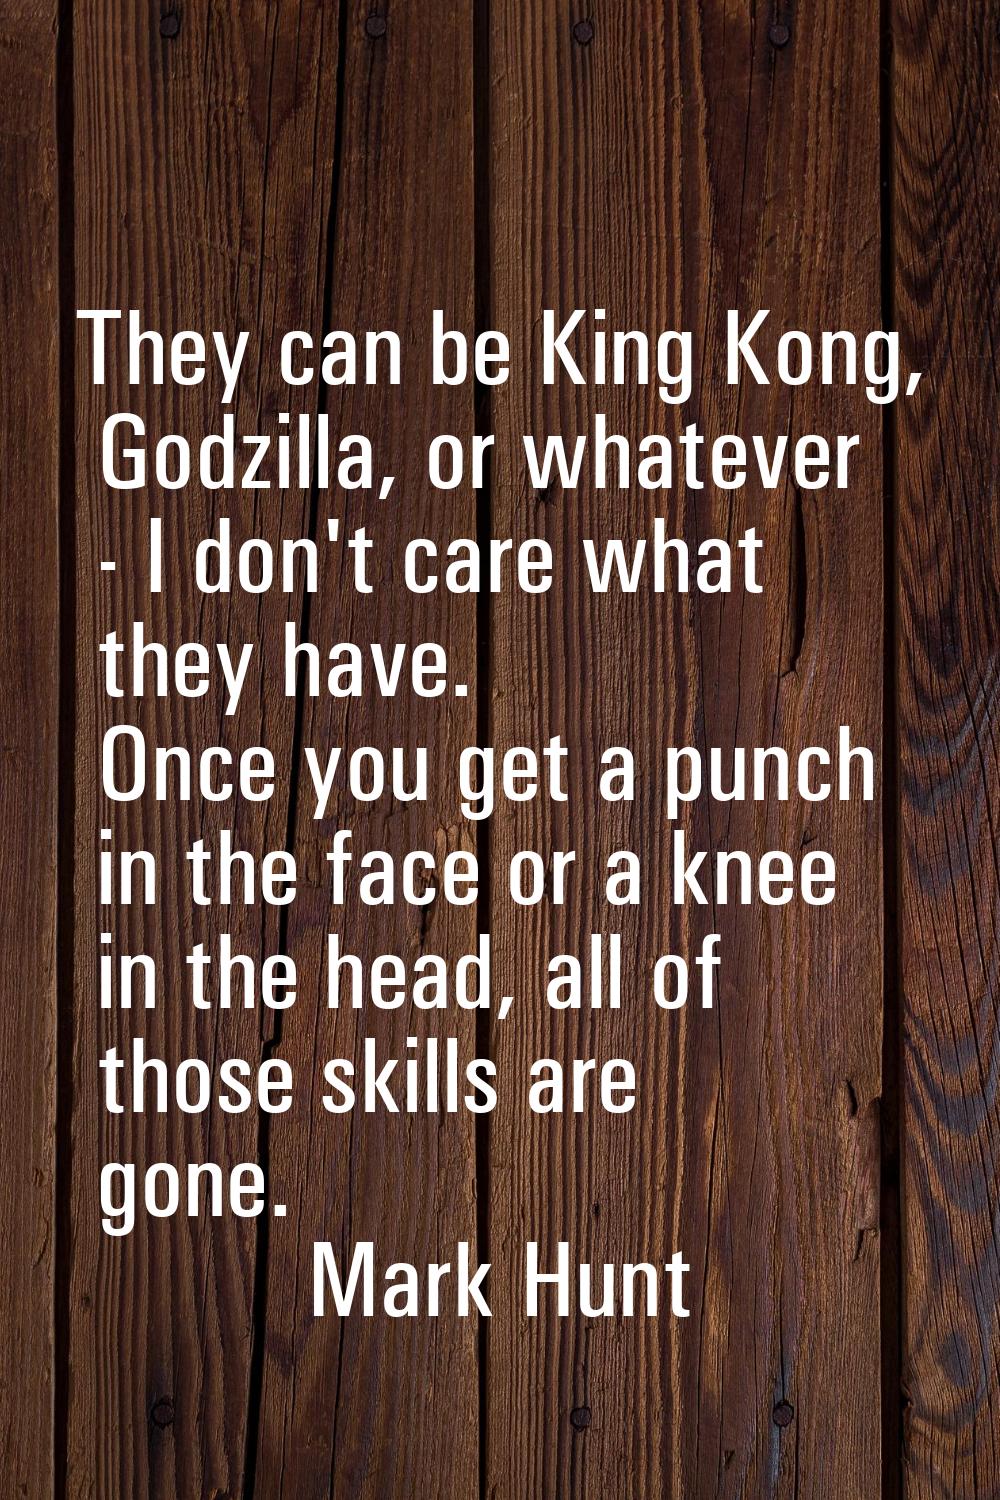 They can be King Kong, Godzilla, or whatever - I don't care what they have. Once you get a punch in